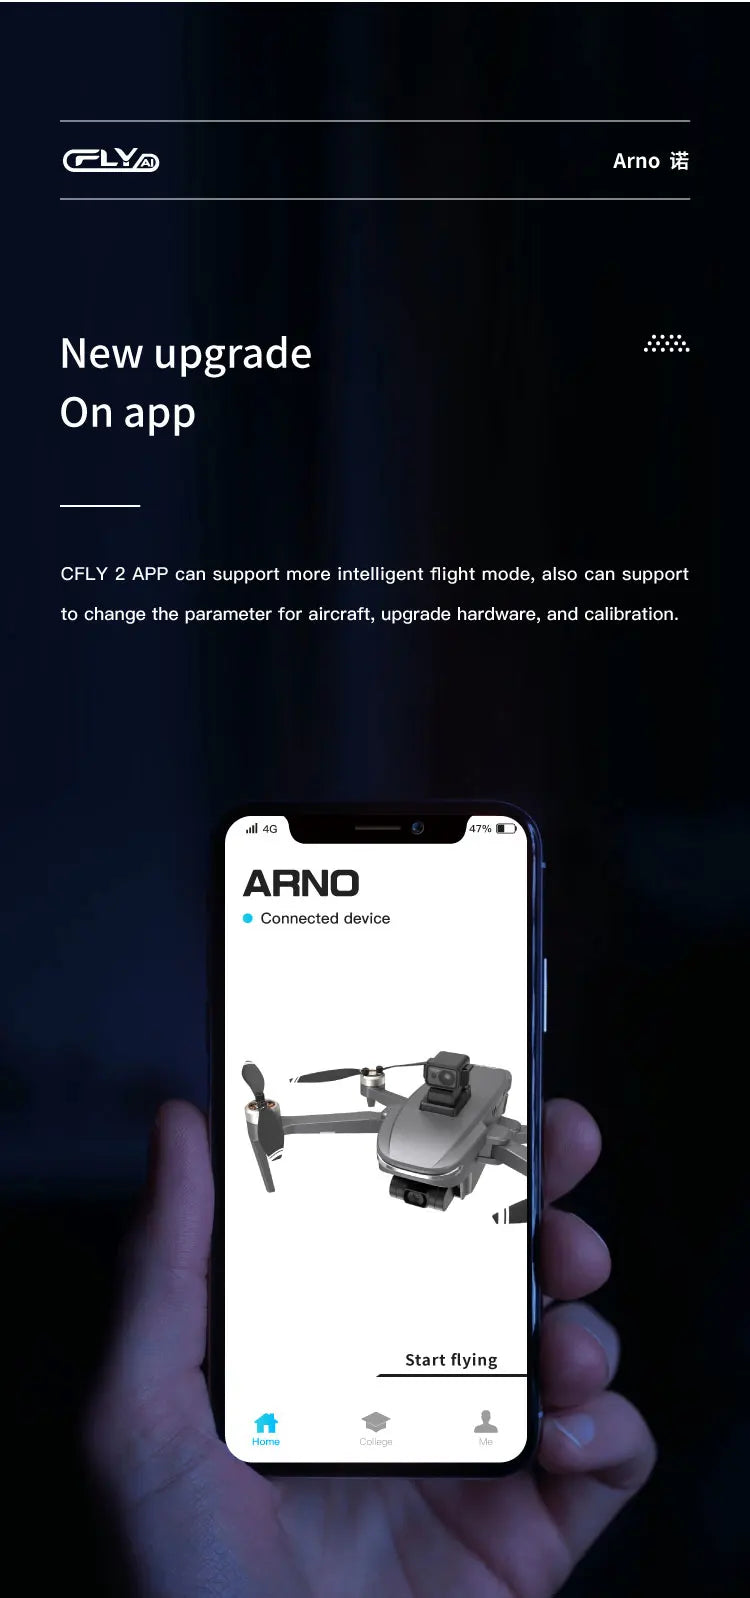 C-FLY Arno SE MAX Drone, CFLY 2 APP can support more intelligent flight mode, also can support to change parameter